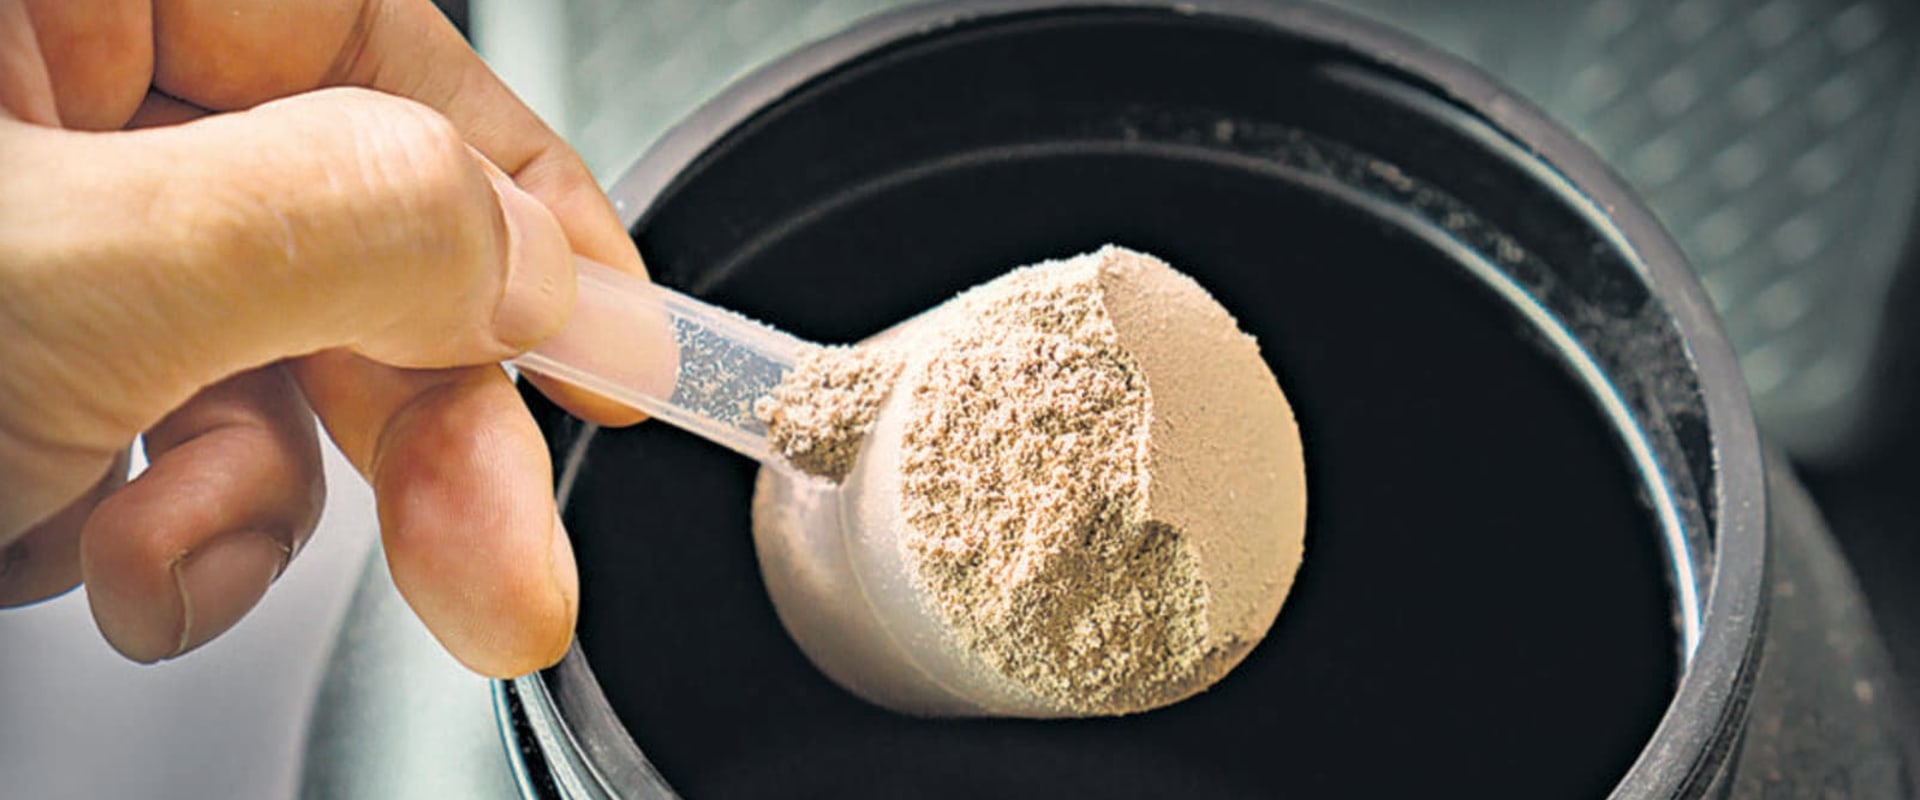 Are protein powders regulated by the government?